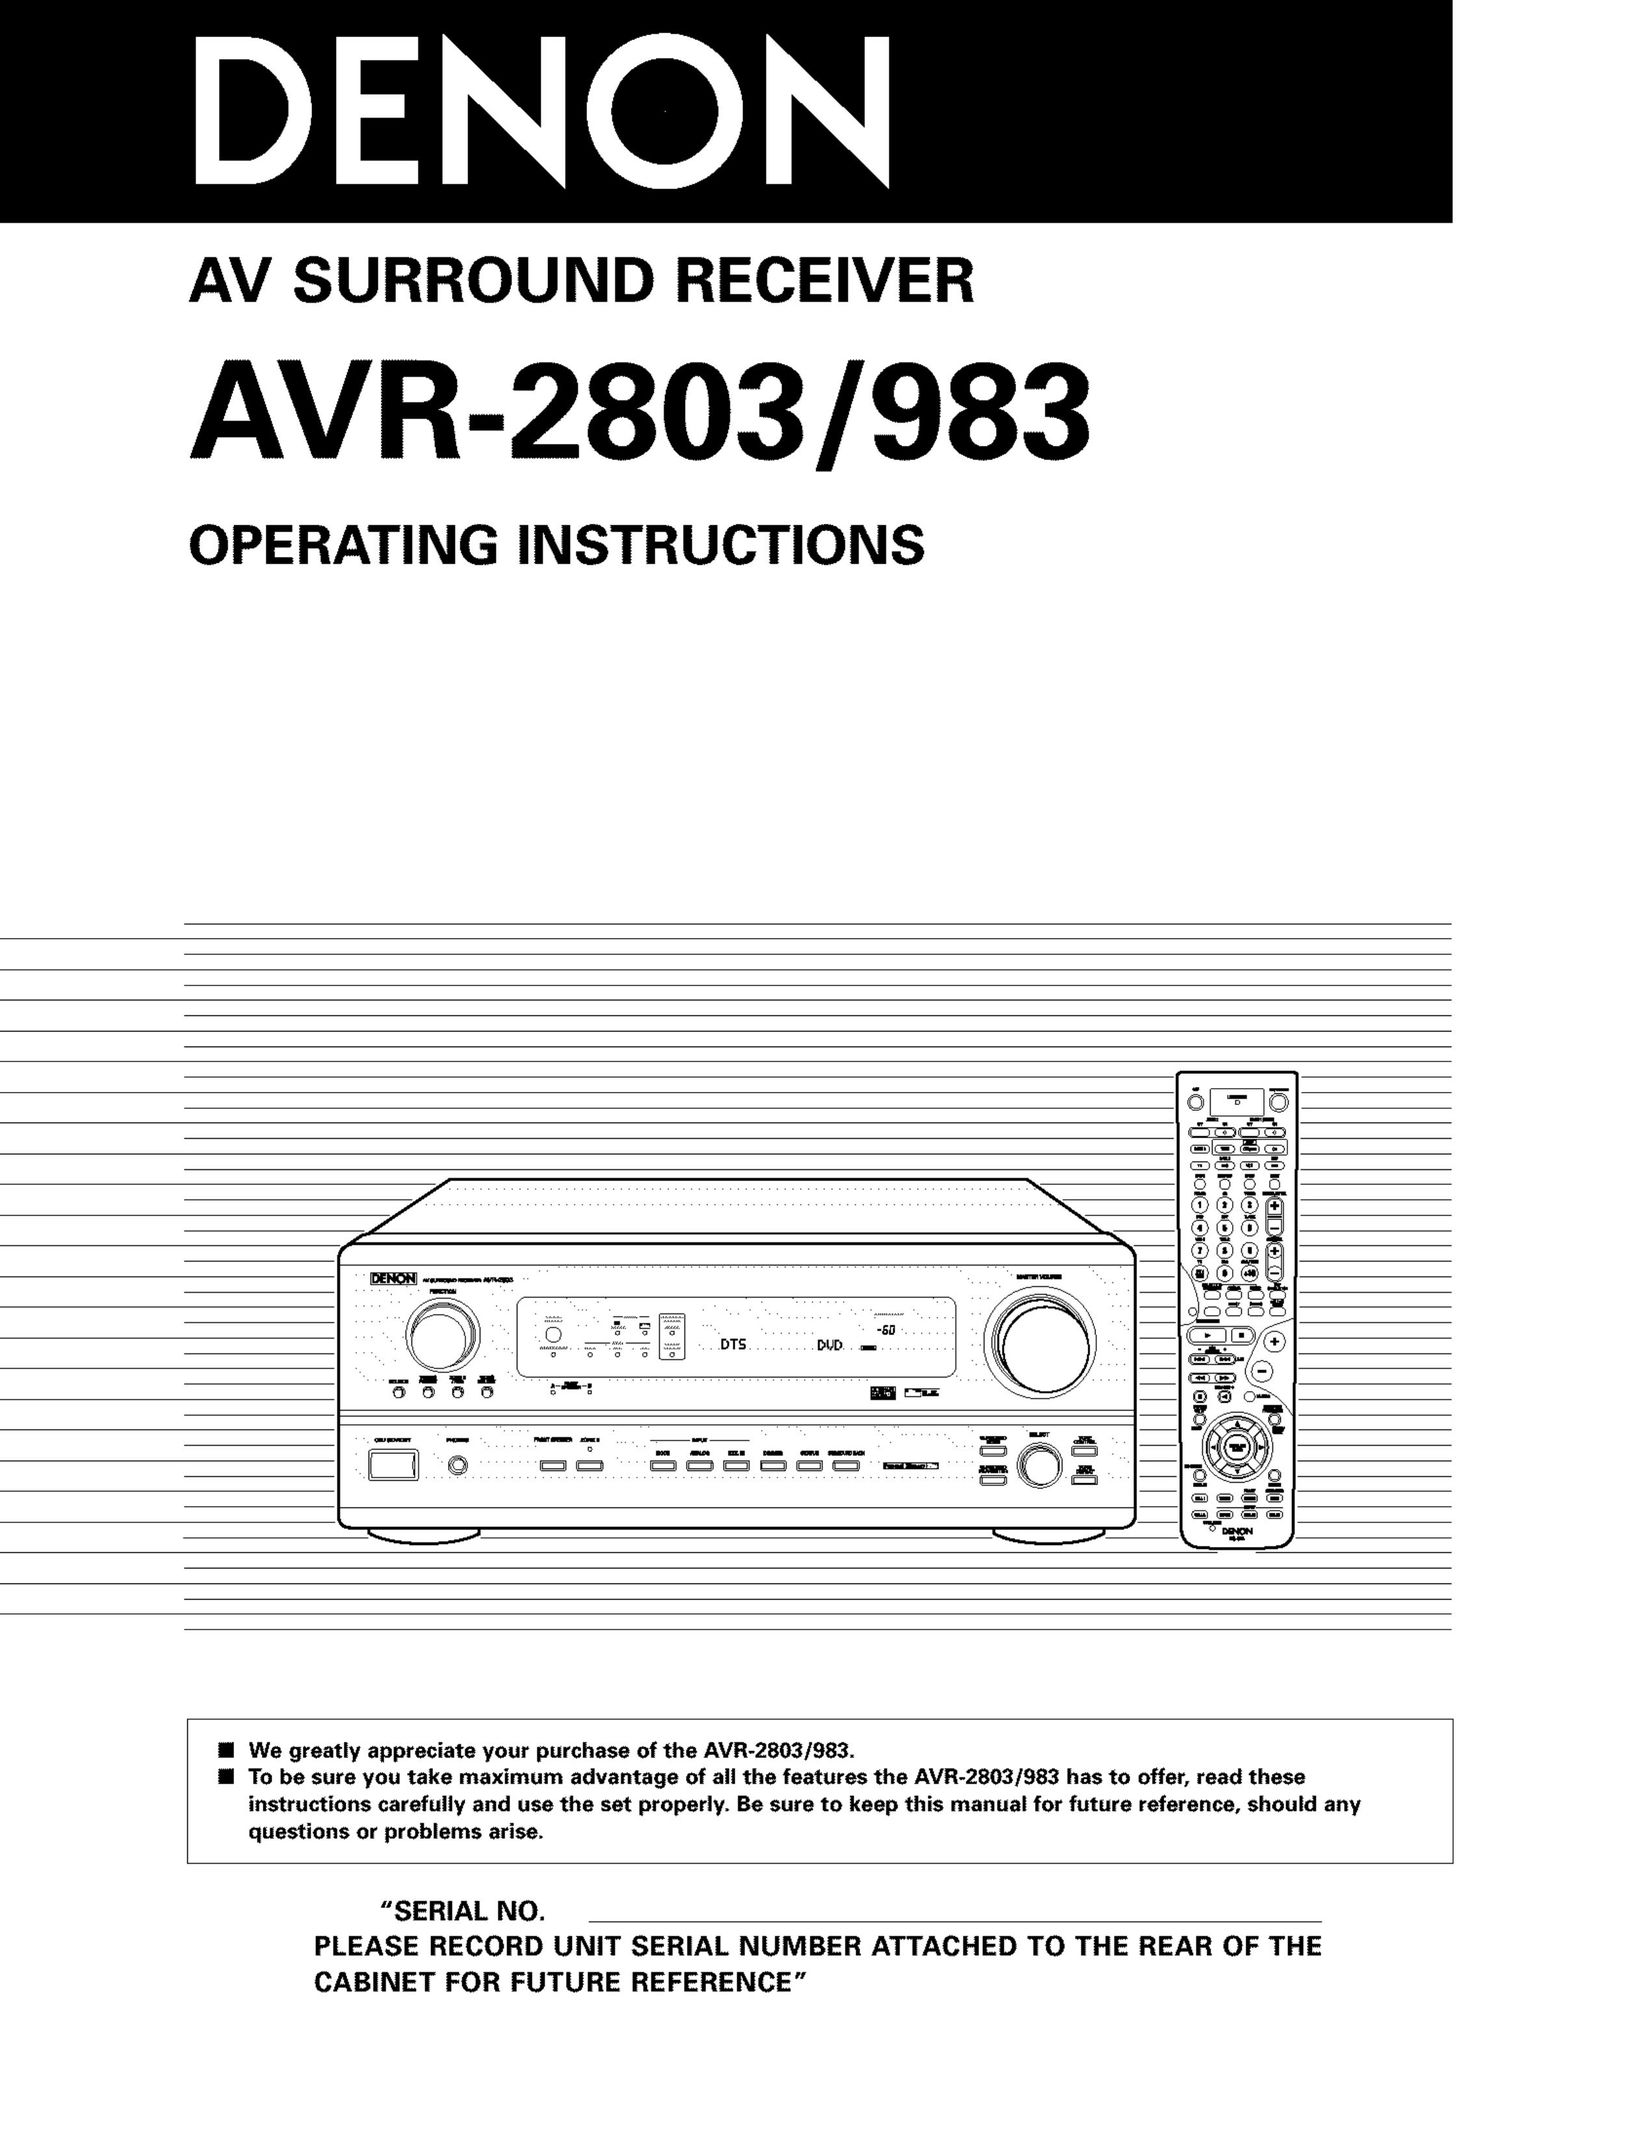 Denon AVR-2803/983 Home Theater System User Manual